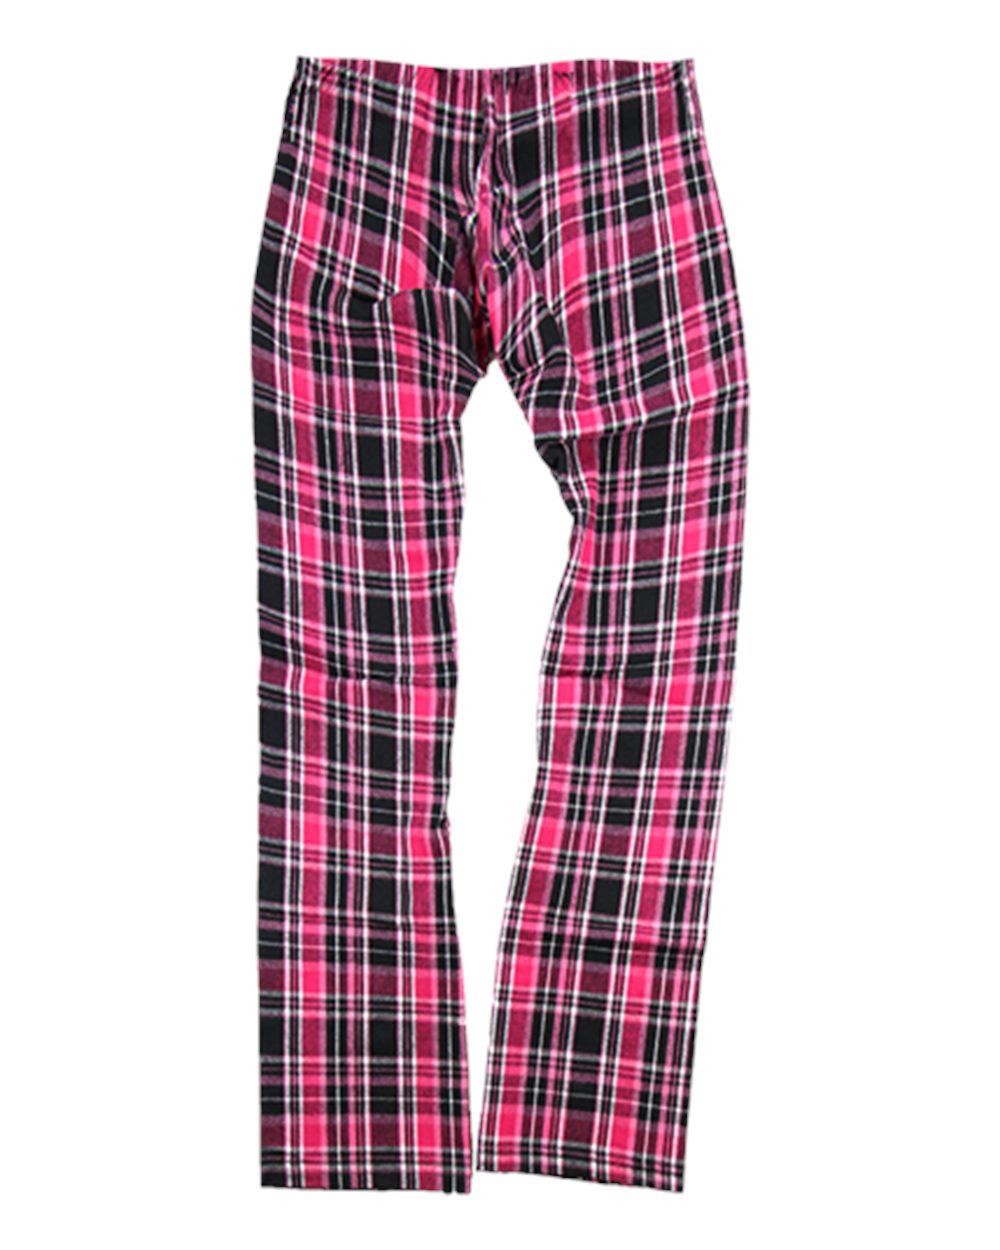 click to view Black/ Hot Pink Plaid